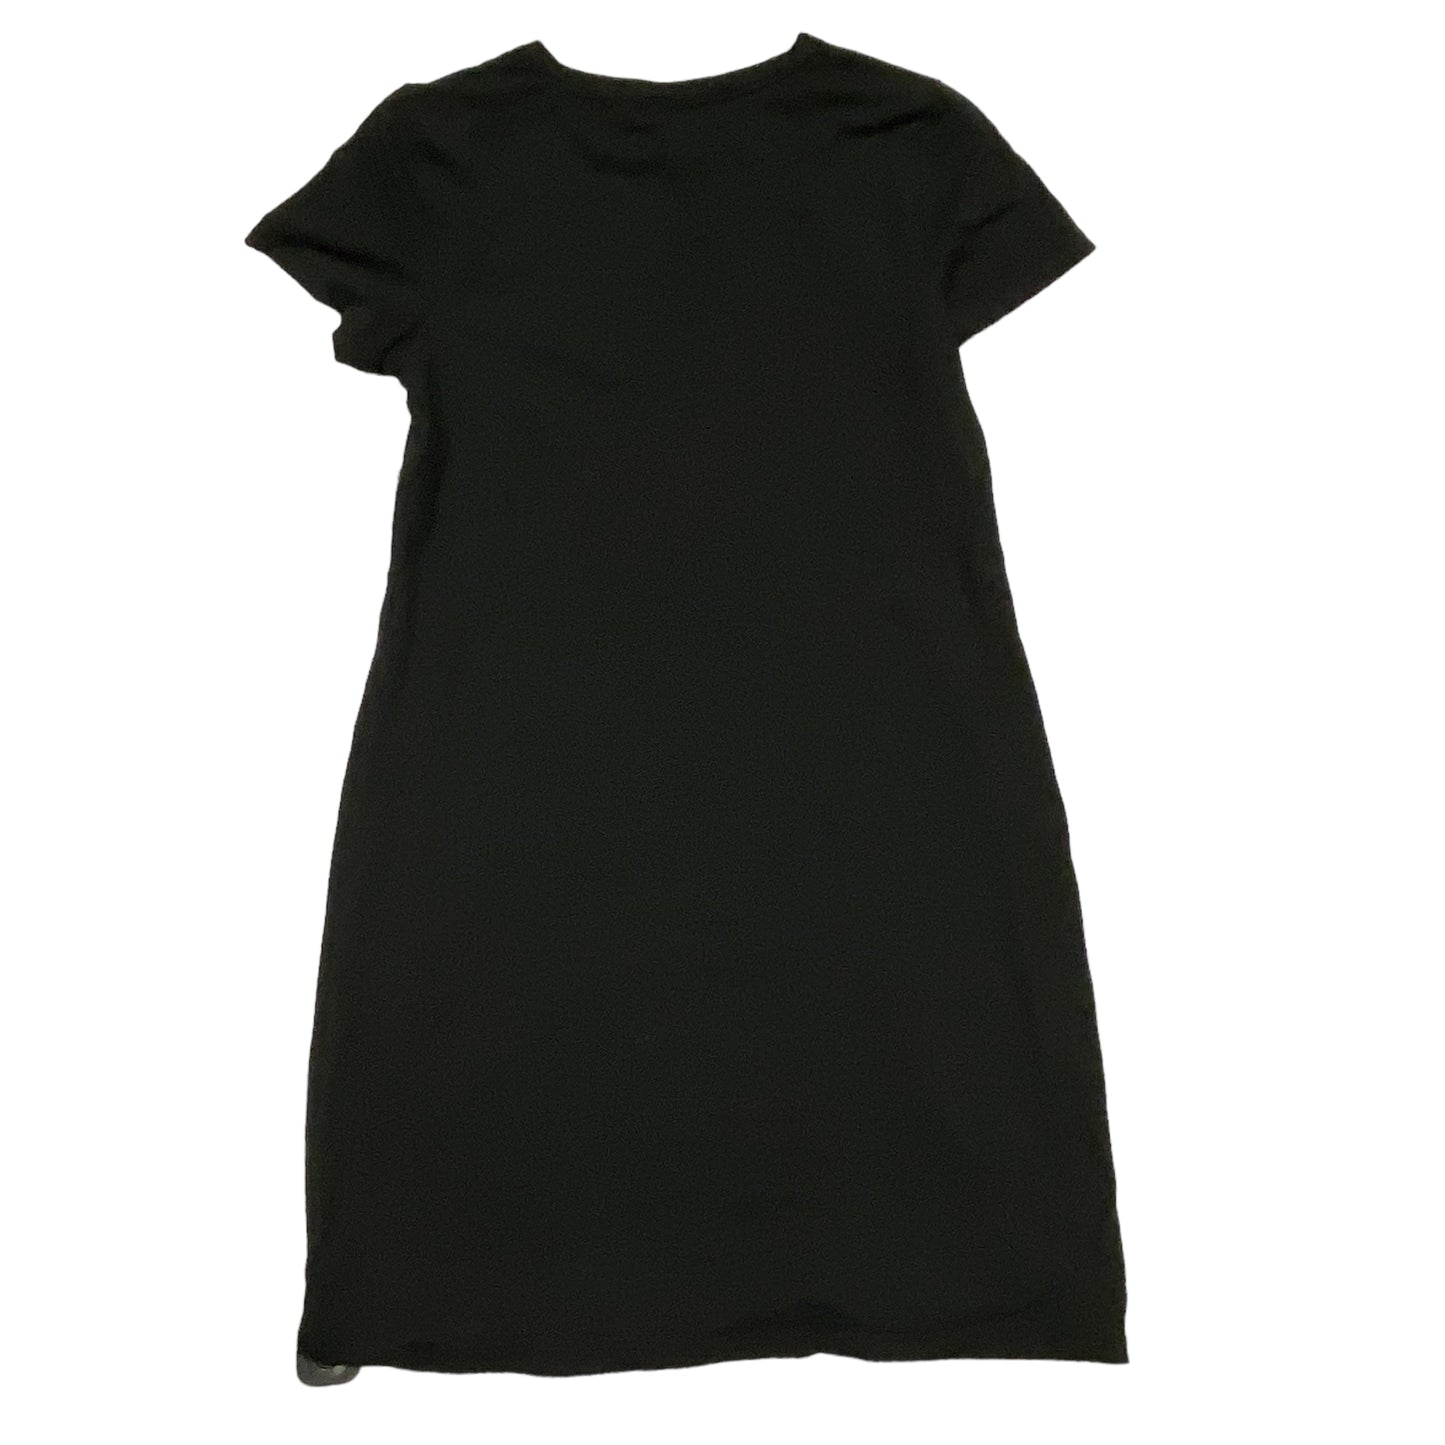 Black Dress Casual Short Old Navy, Size S